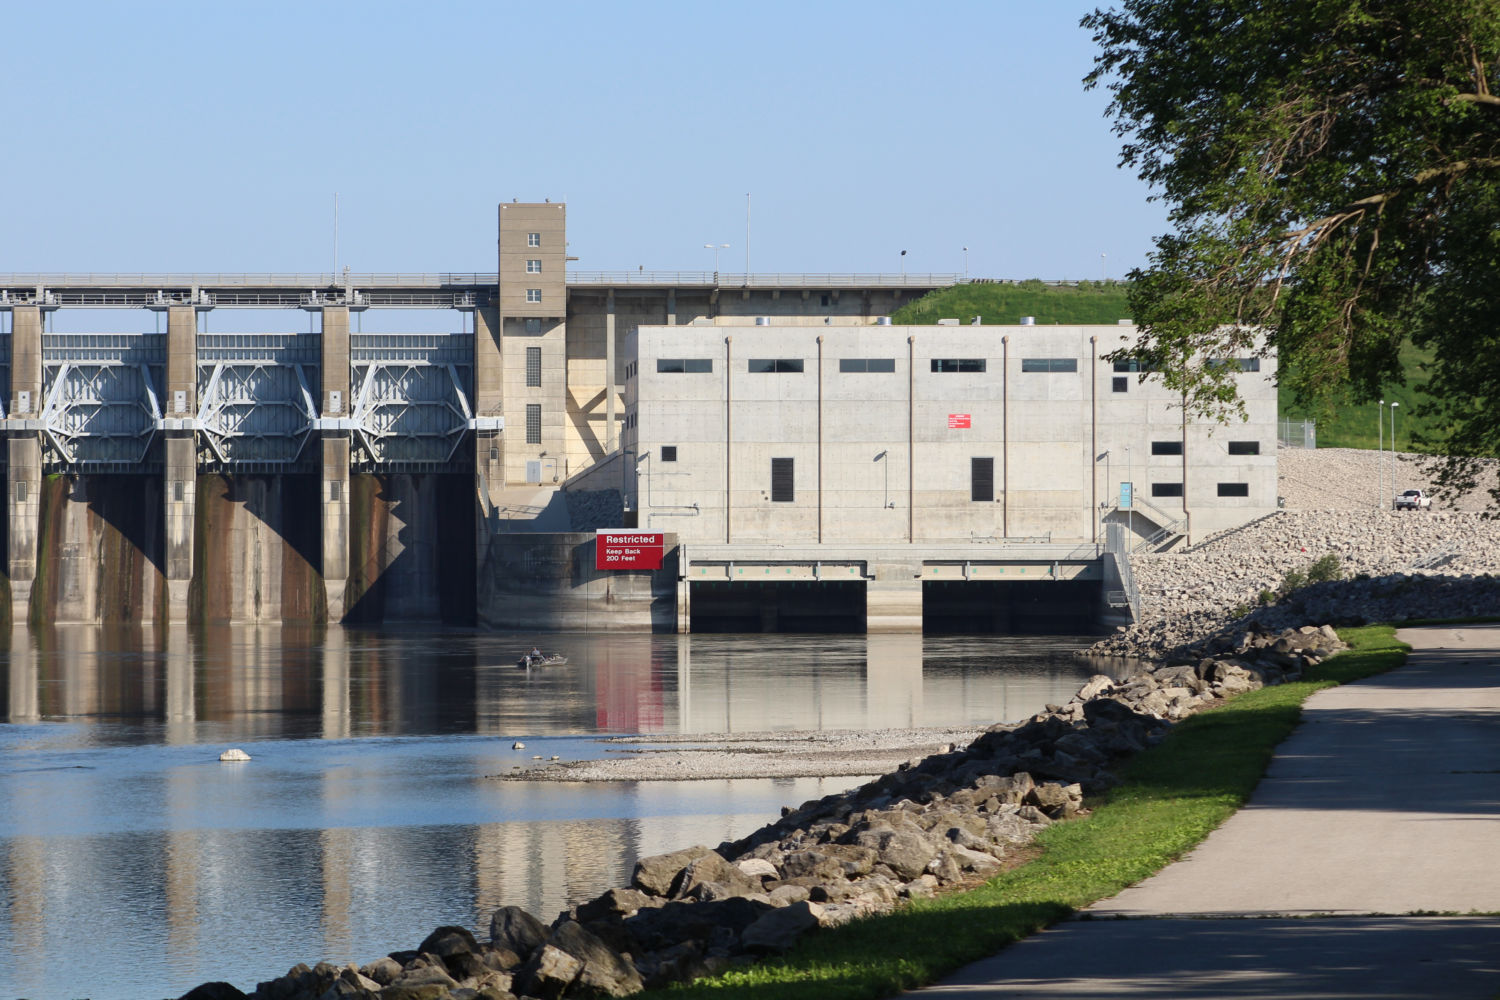 Can Retrofitting Dams for Hydro Provide a Green Energy Boost? Yale E360